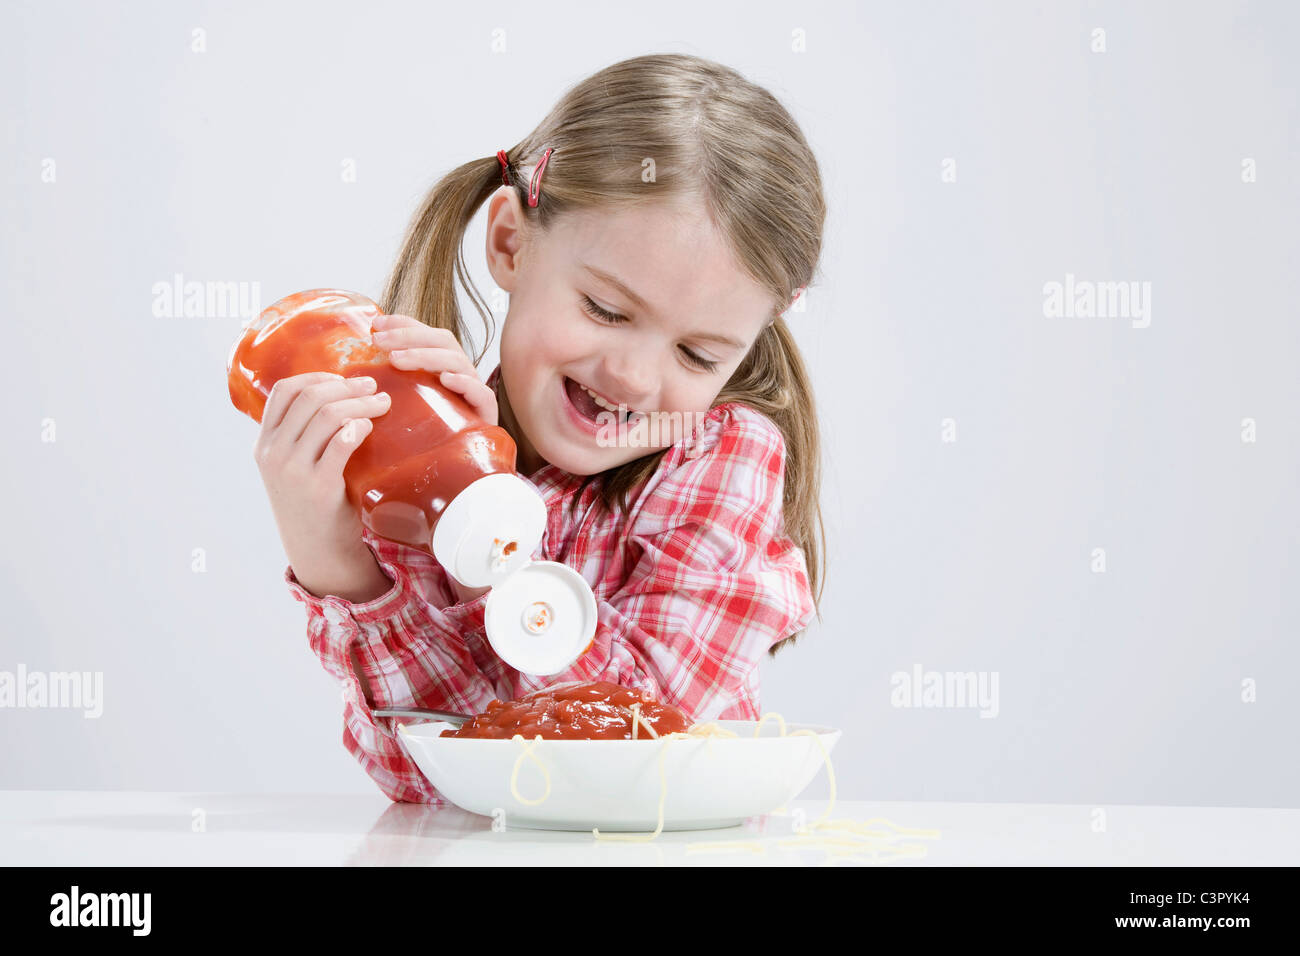 Girl (4-5) pouring ketchup sur spaghetti Banque D'Images